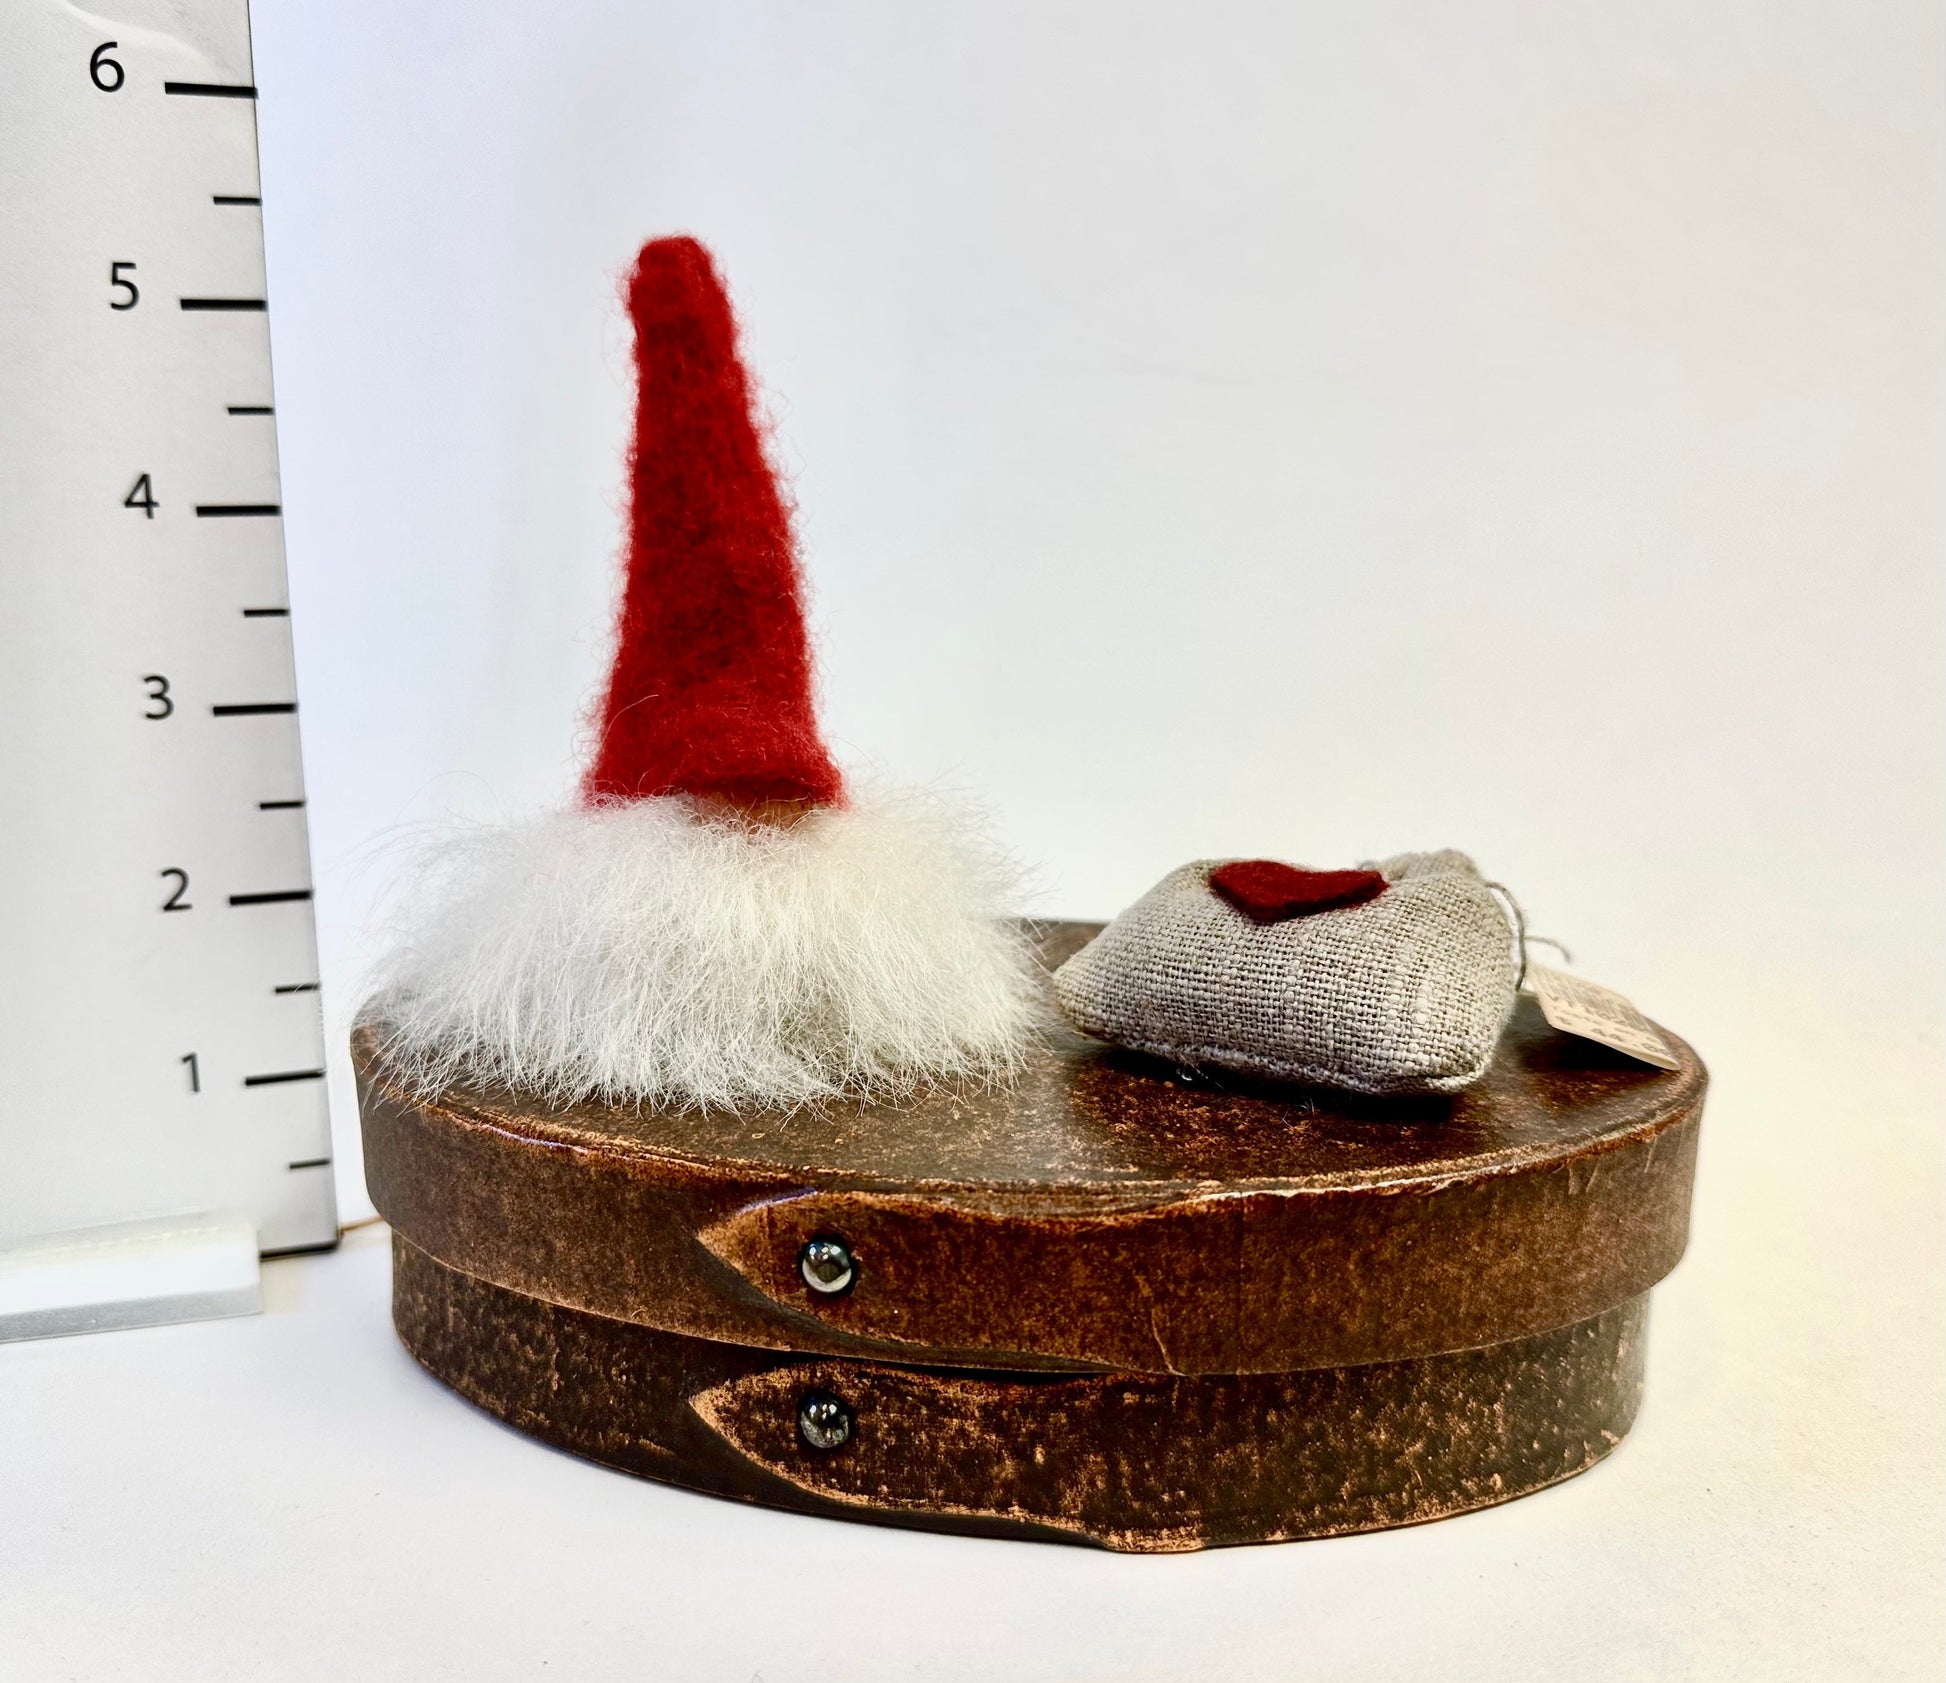 Tomte on Oval Box